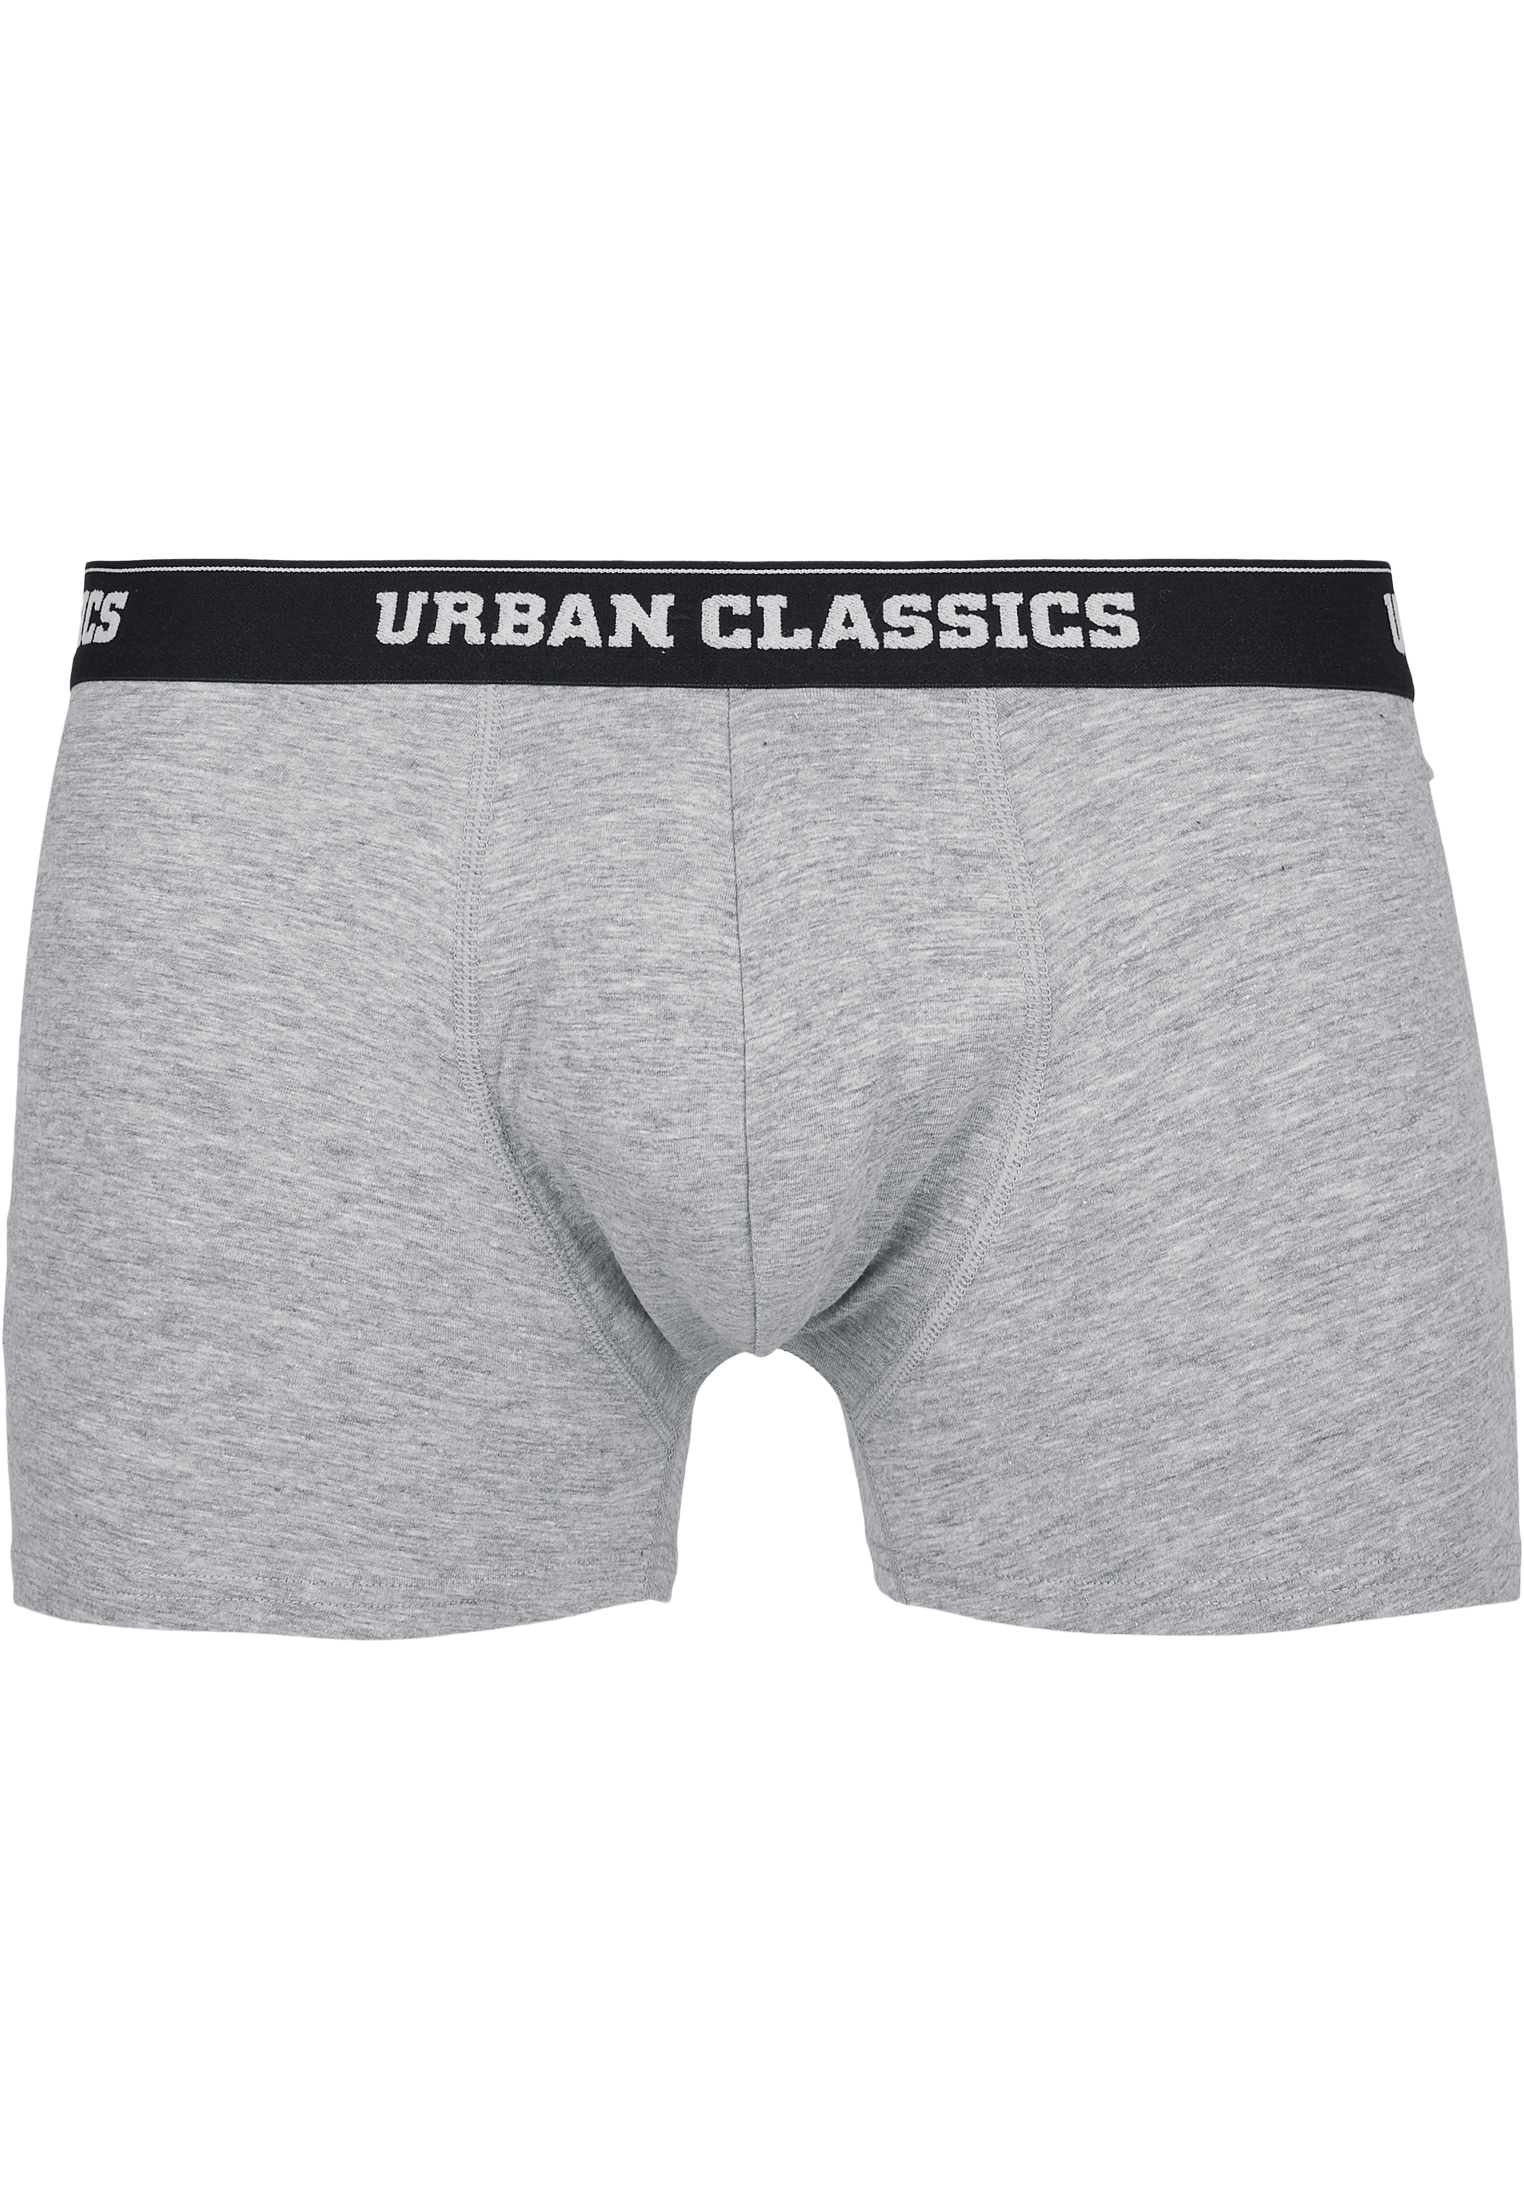 Underwear Men Boxer Shorts Double Pack in Farbe small pineapple aop+grey